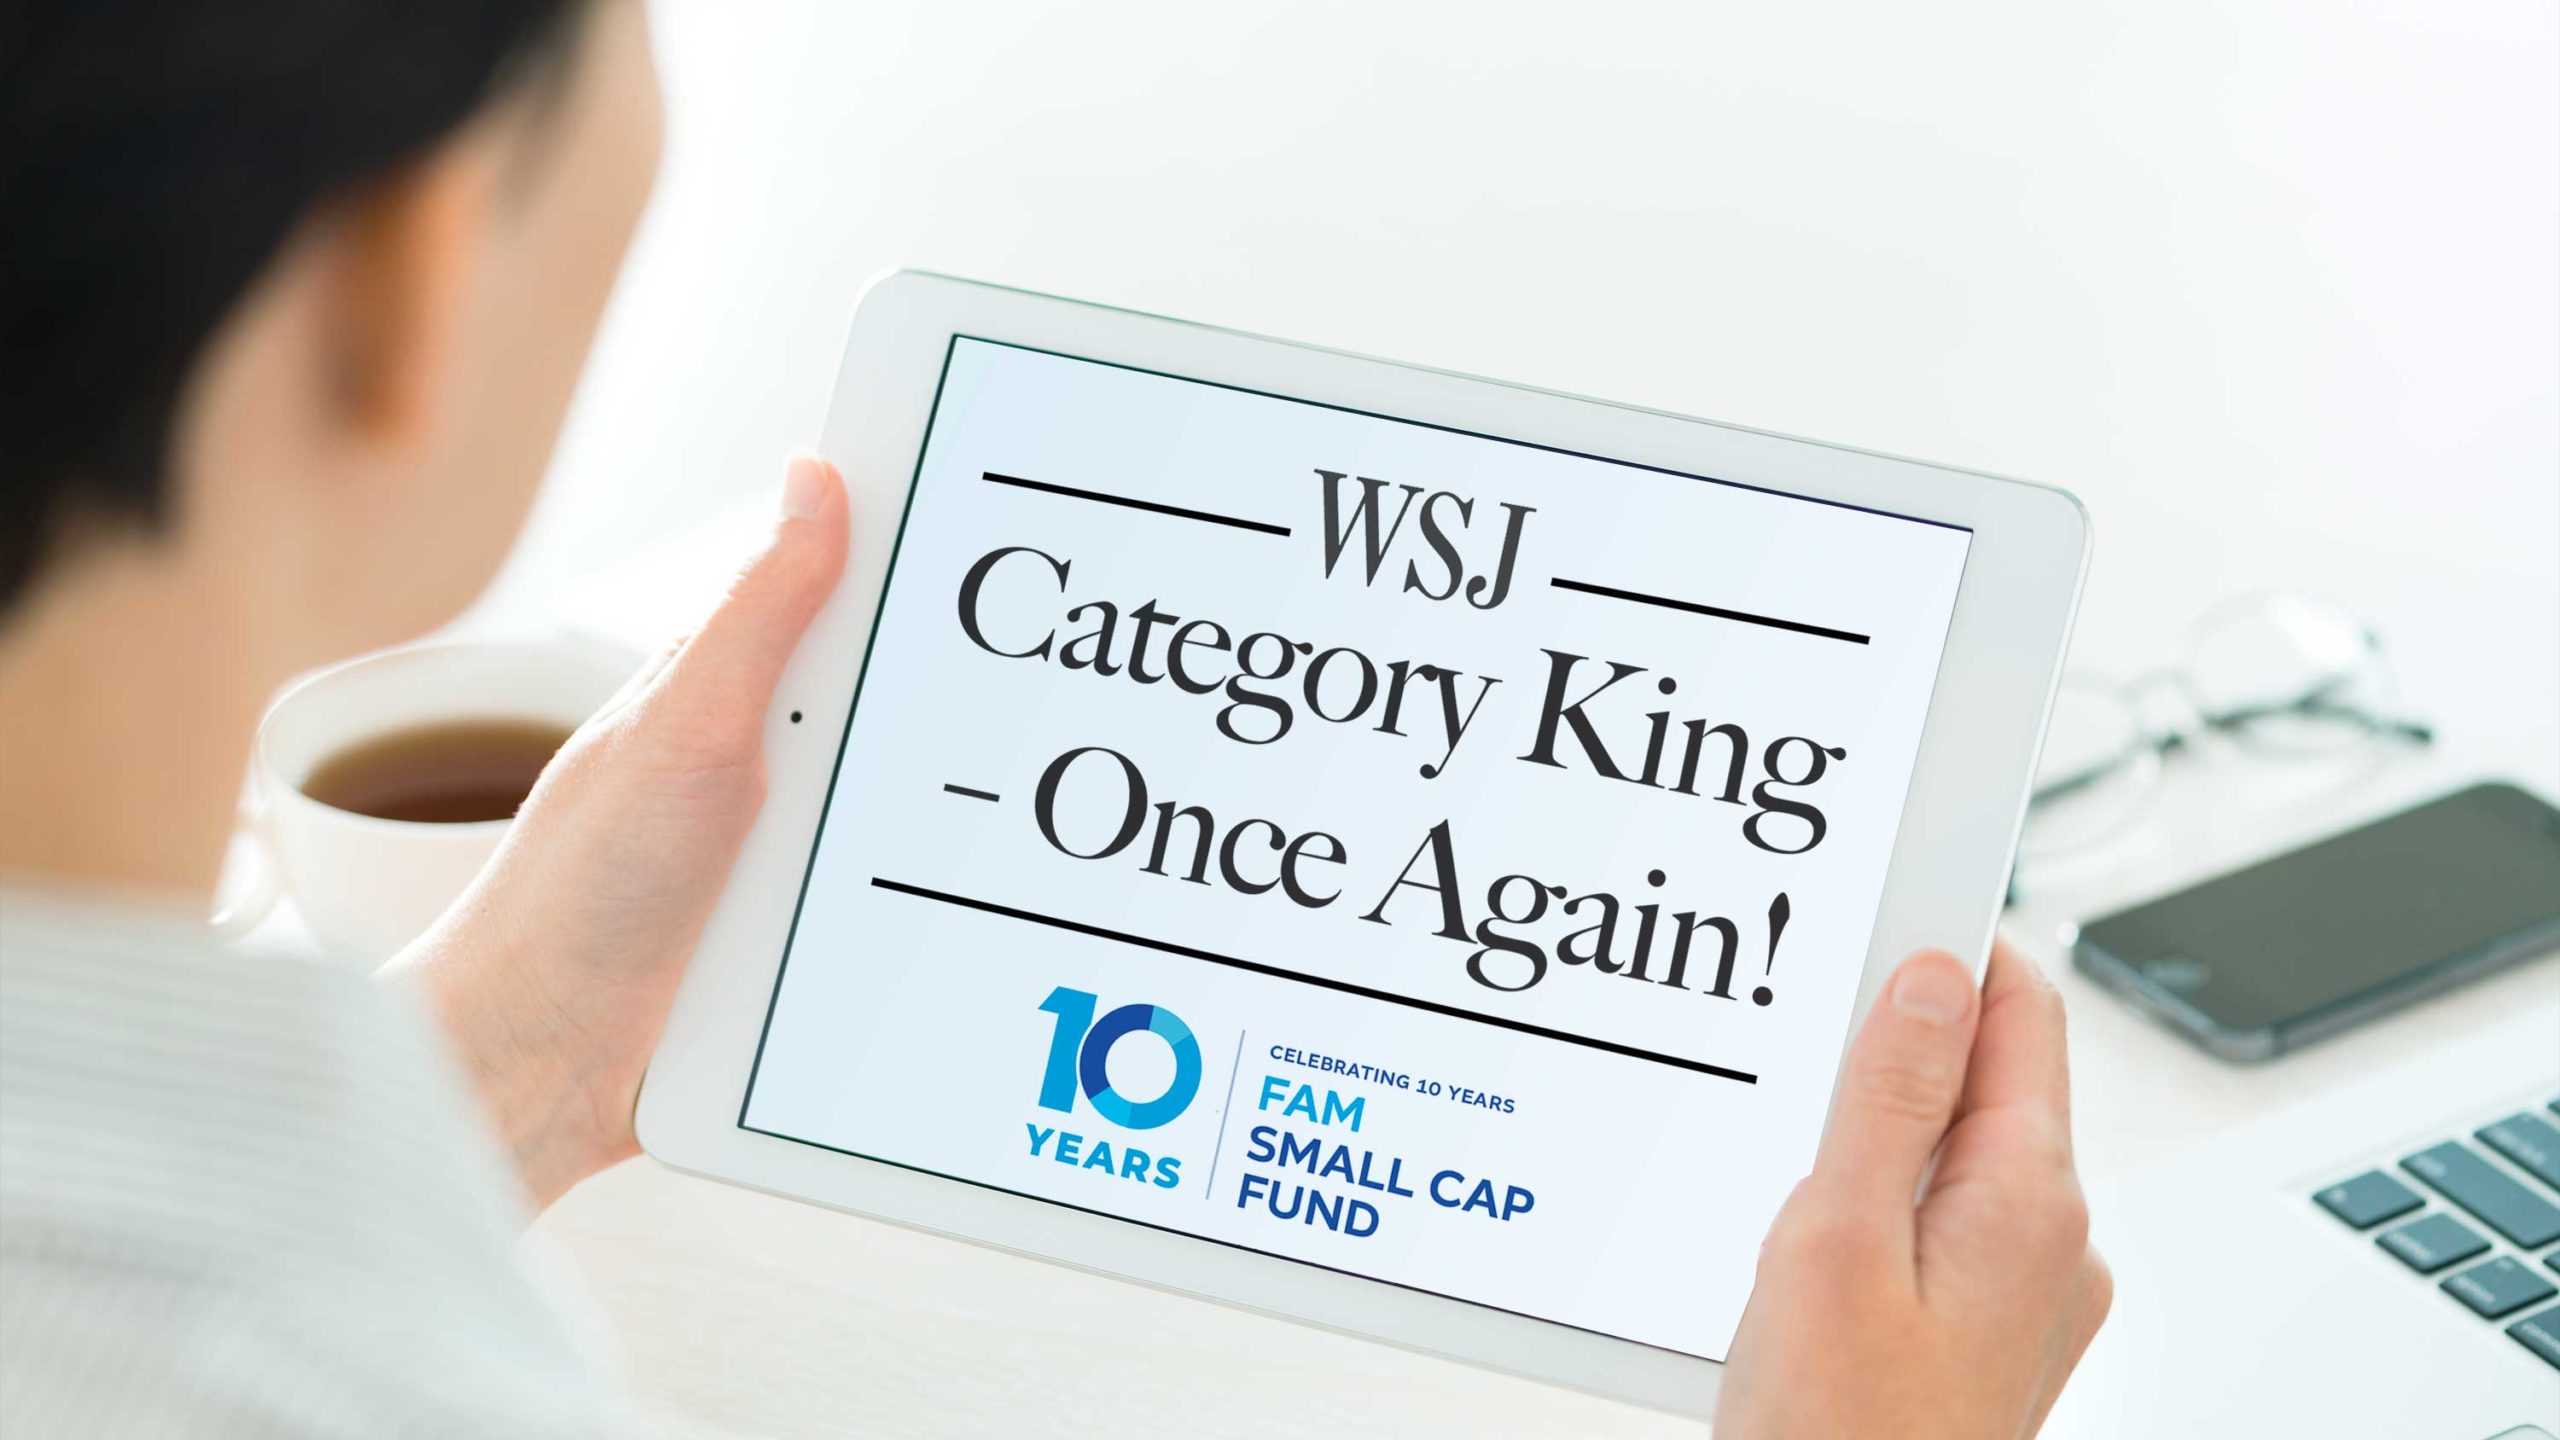 FAM Small Cap Fund: WSJ Category King – Once Again